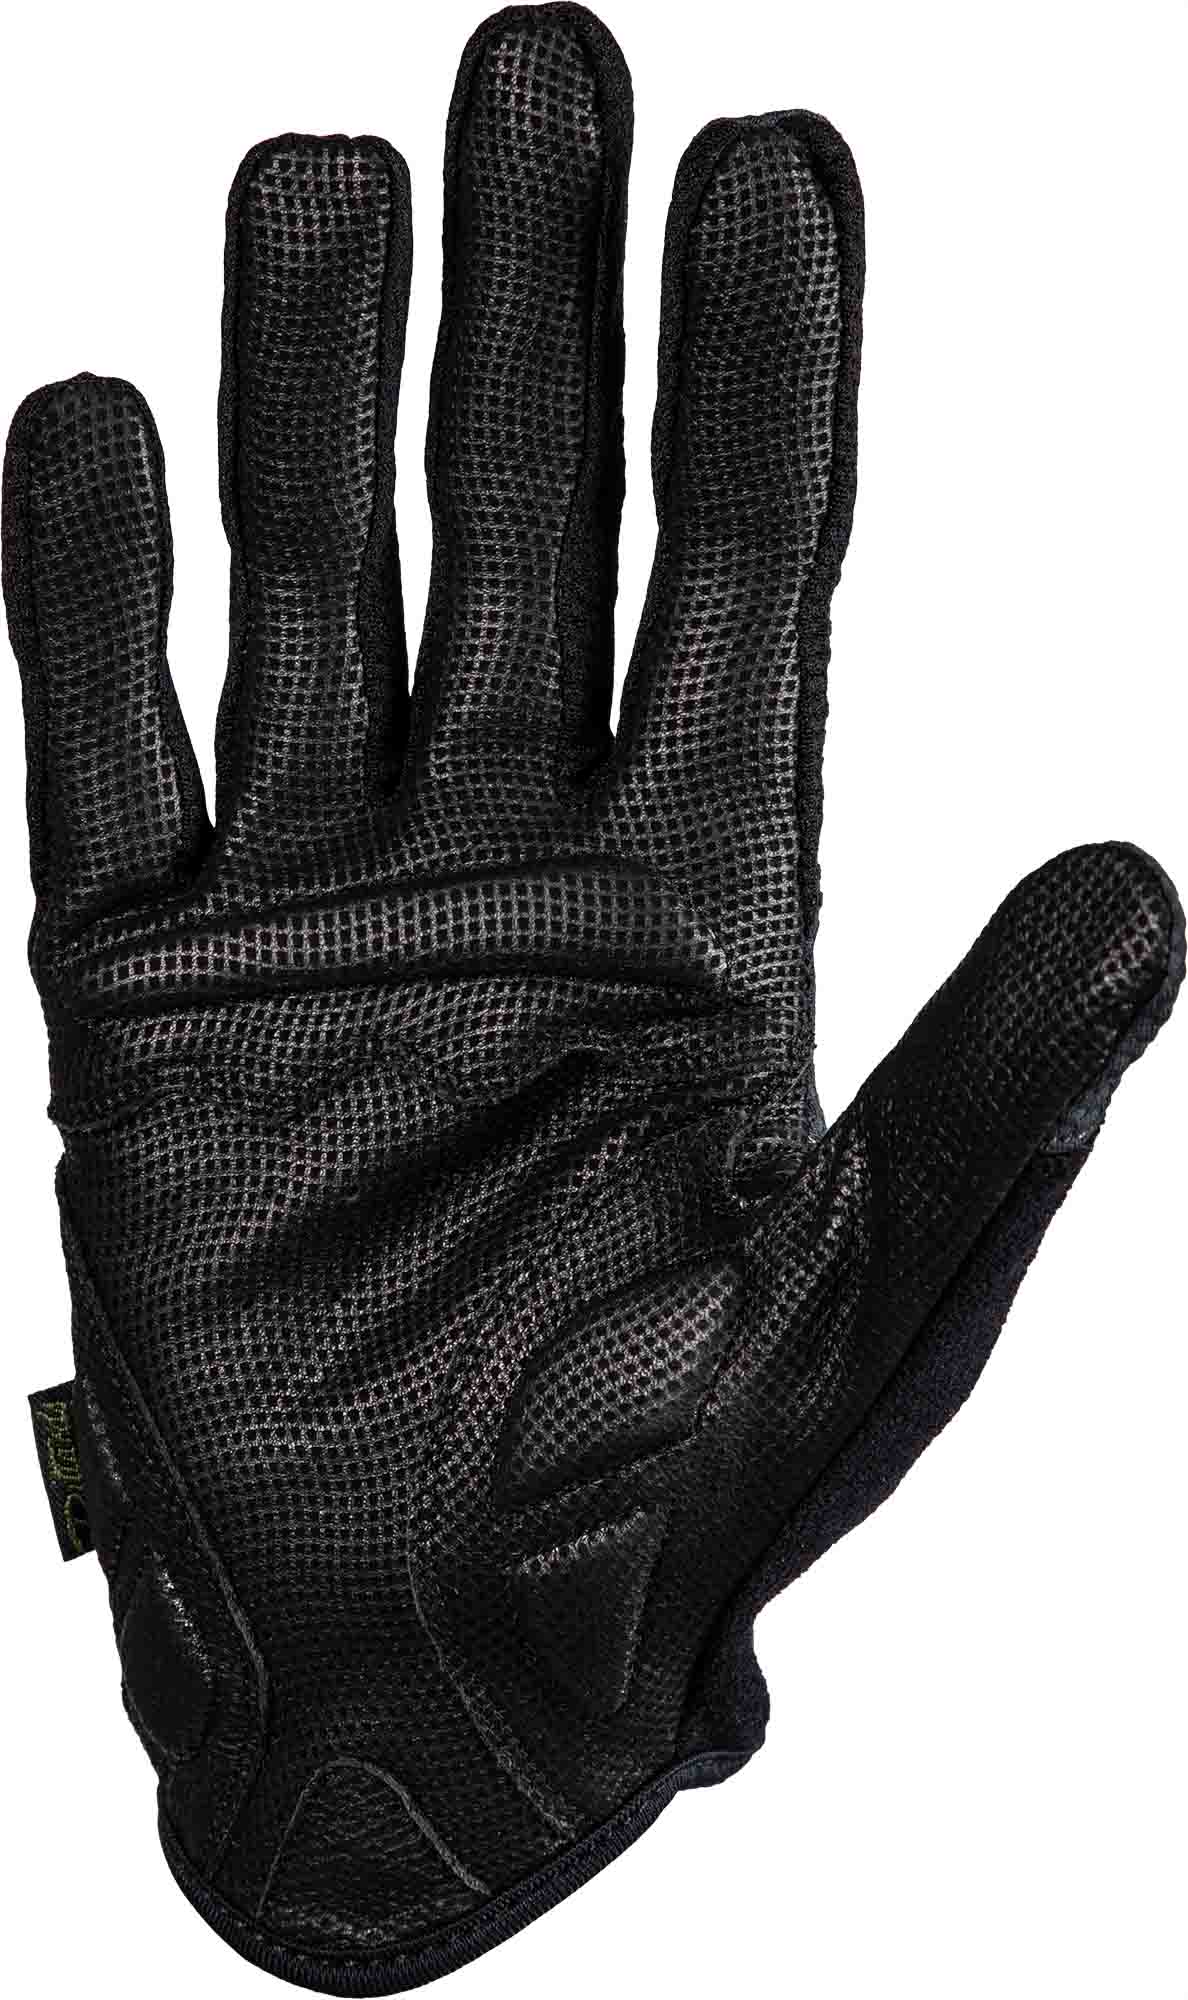 Long finger cycling gloves